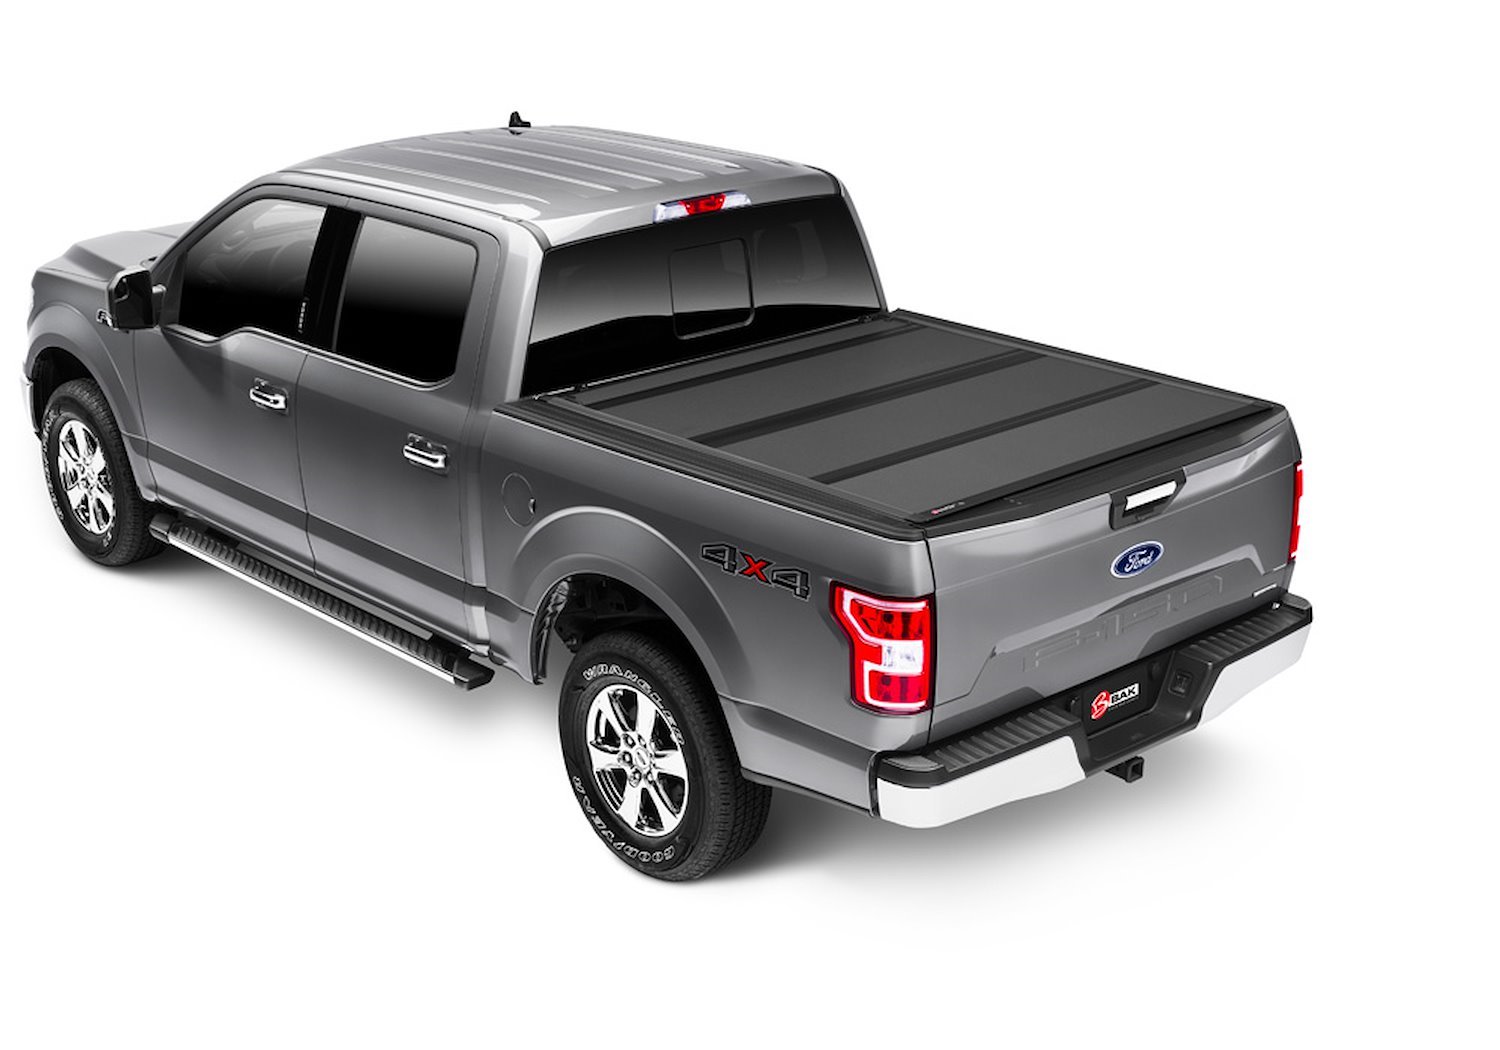 BAKFlip MX4 Tonneau Cover Fits Select Isuzu and Chevrolet D-Max Extended Cab, Bed Length: 5.8 ft.